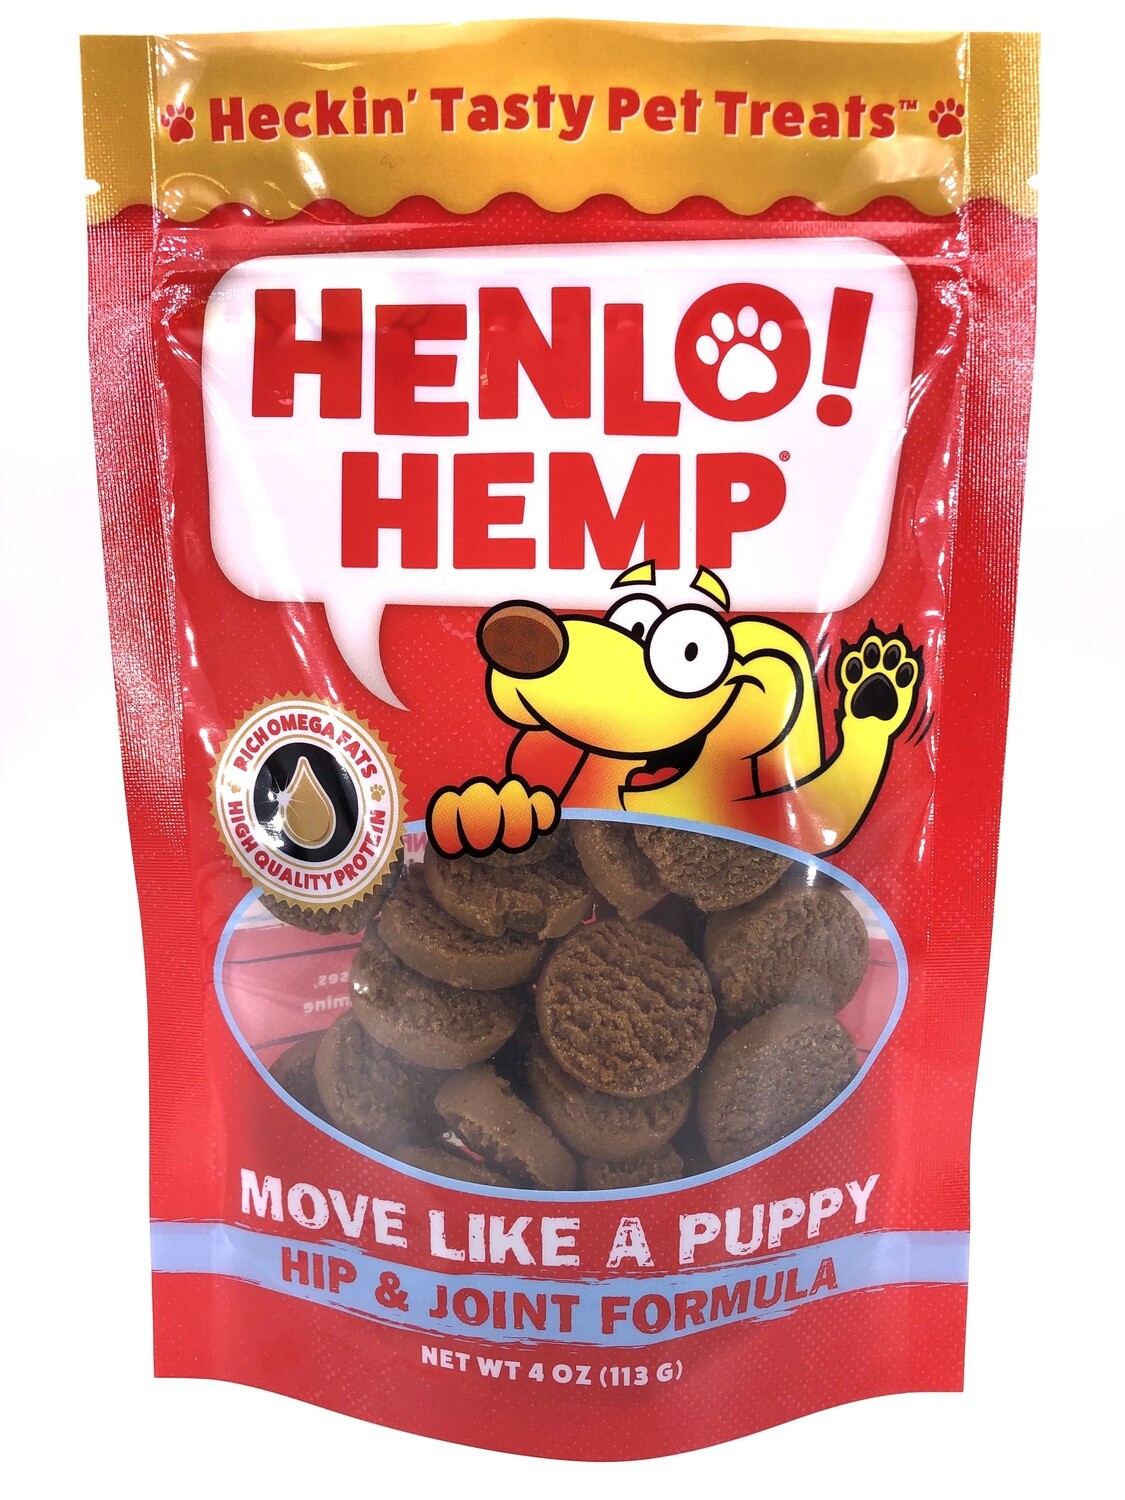 MOVE LIKE A PUPPY- Hip &amp; Joint Formula